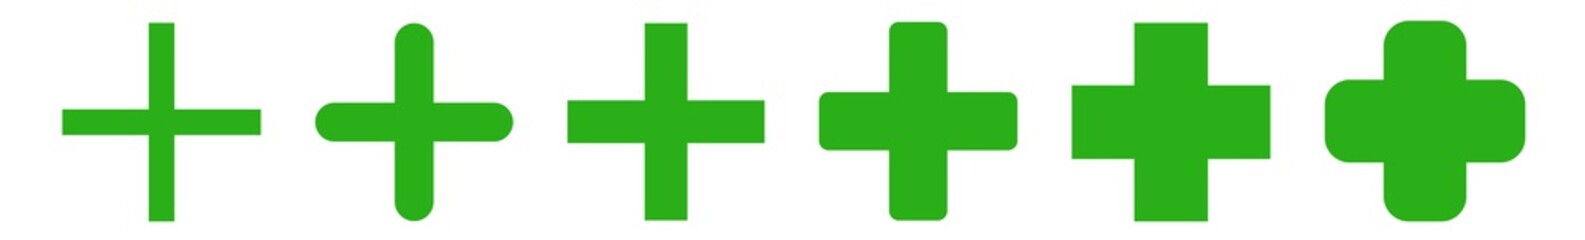 Cross Plus Icon Green | First Aid | Addition Symbol | Medical Logo | Positive  Sign | Isolated | Variations